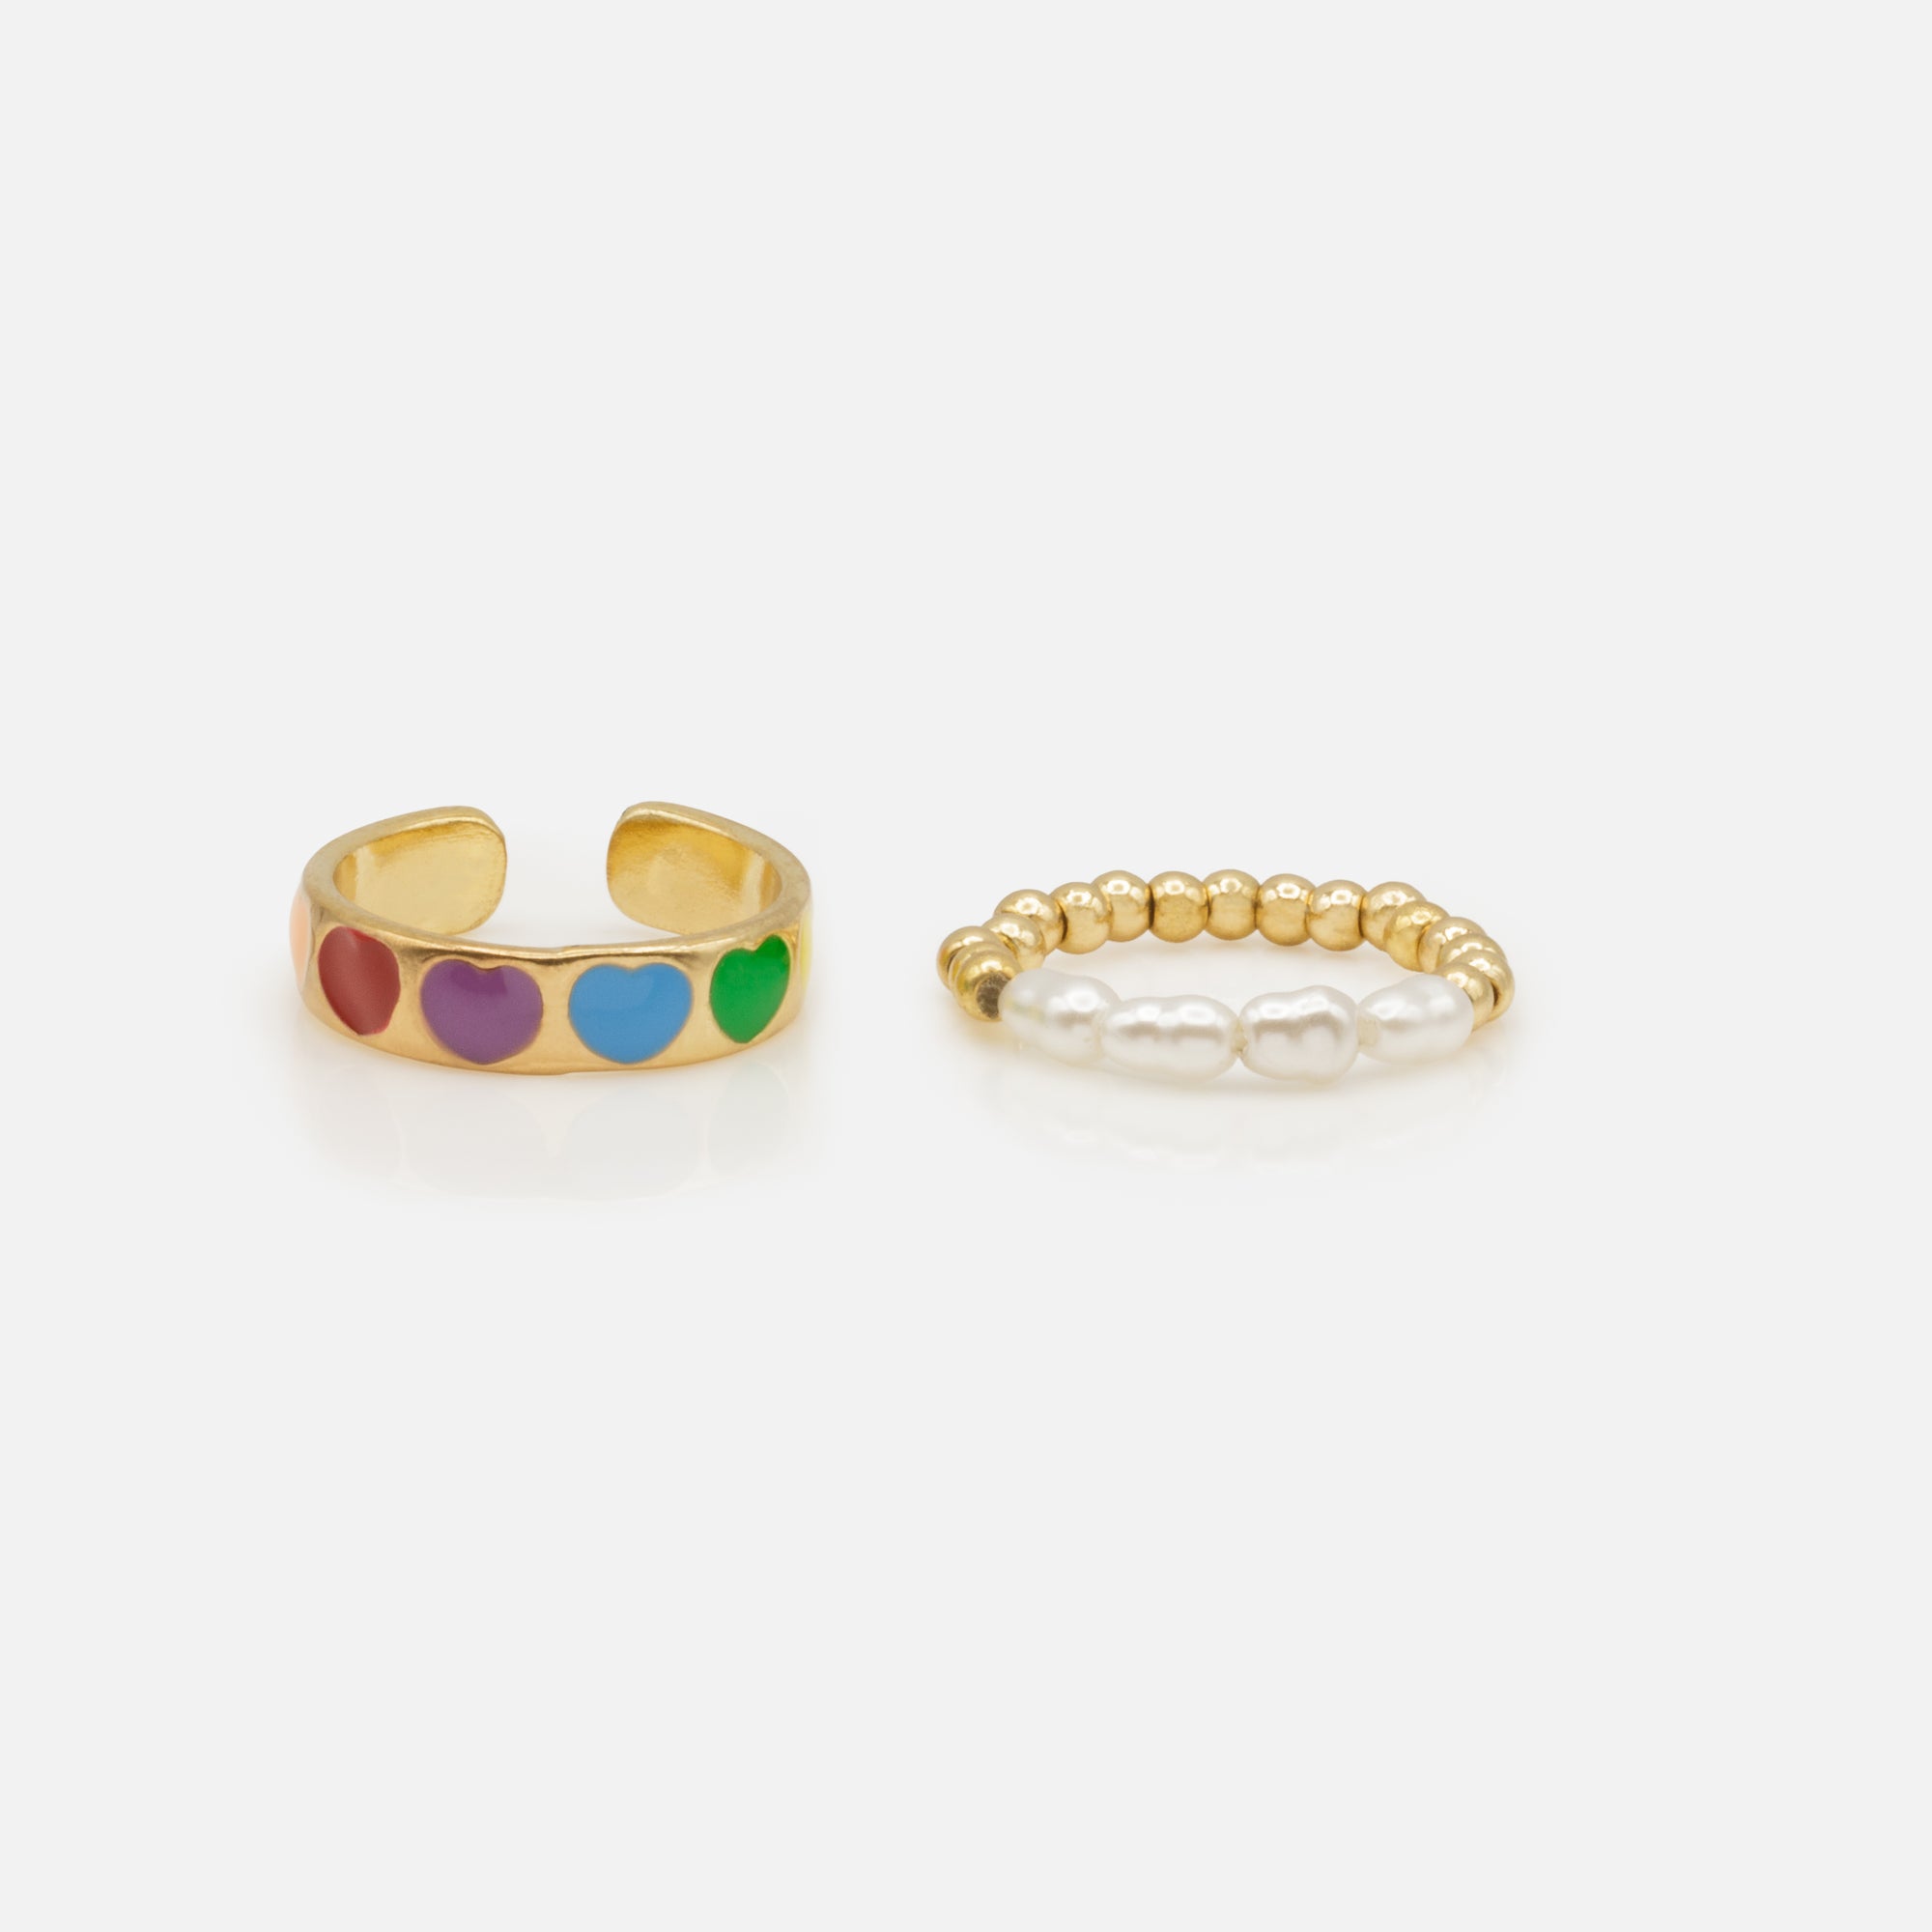 Golden open ring set with multicolored hearts and elastic ring with golden balls and pearls